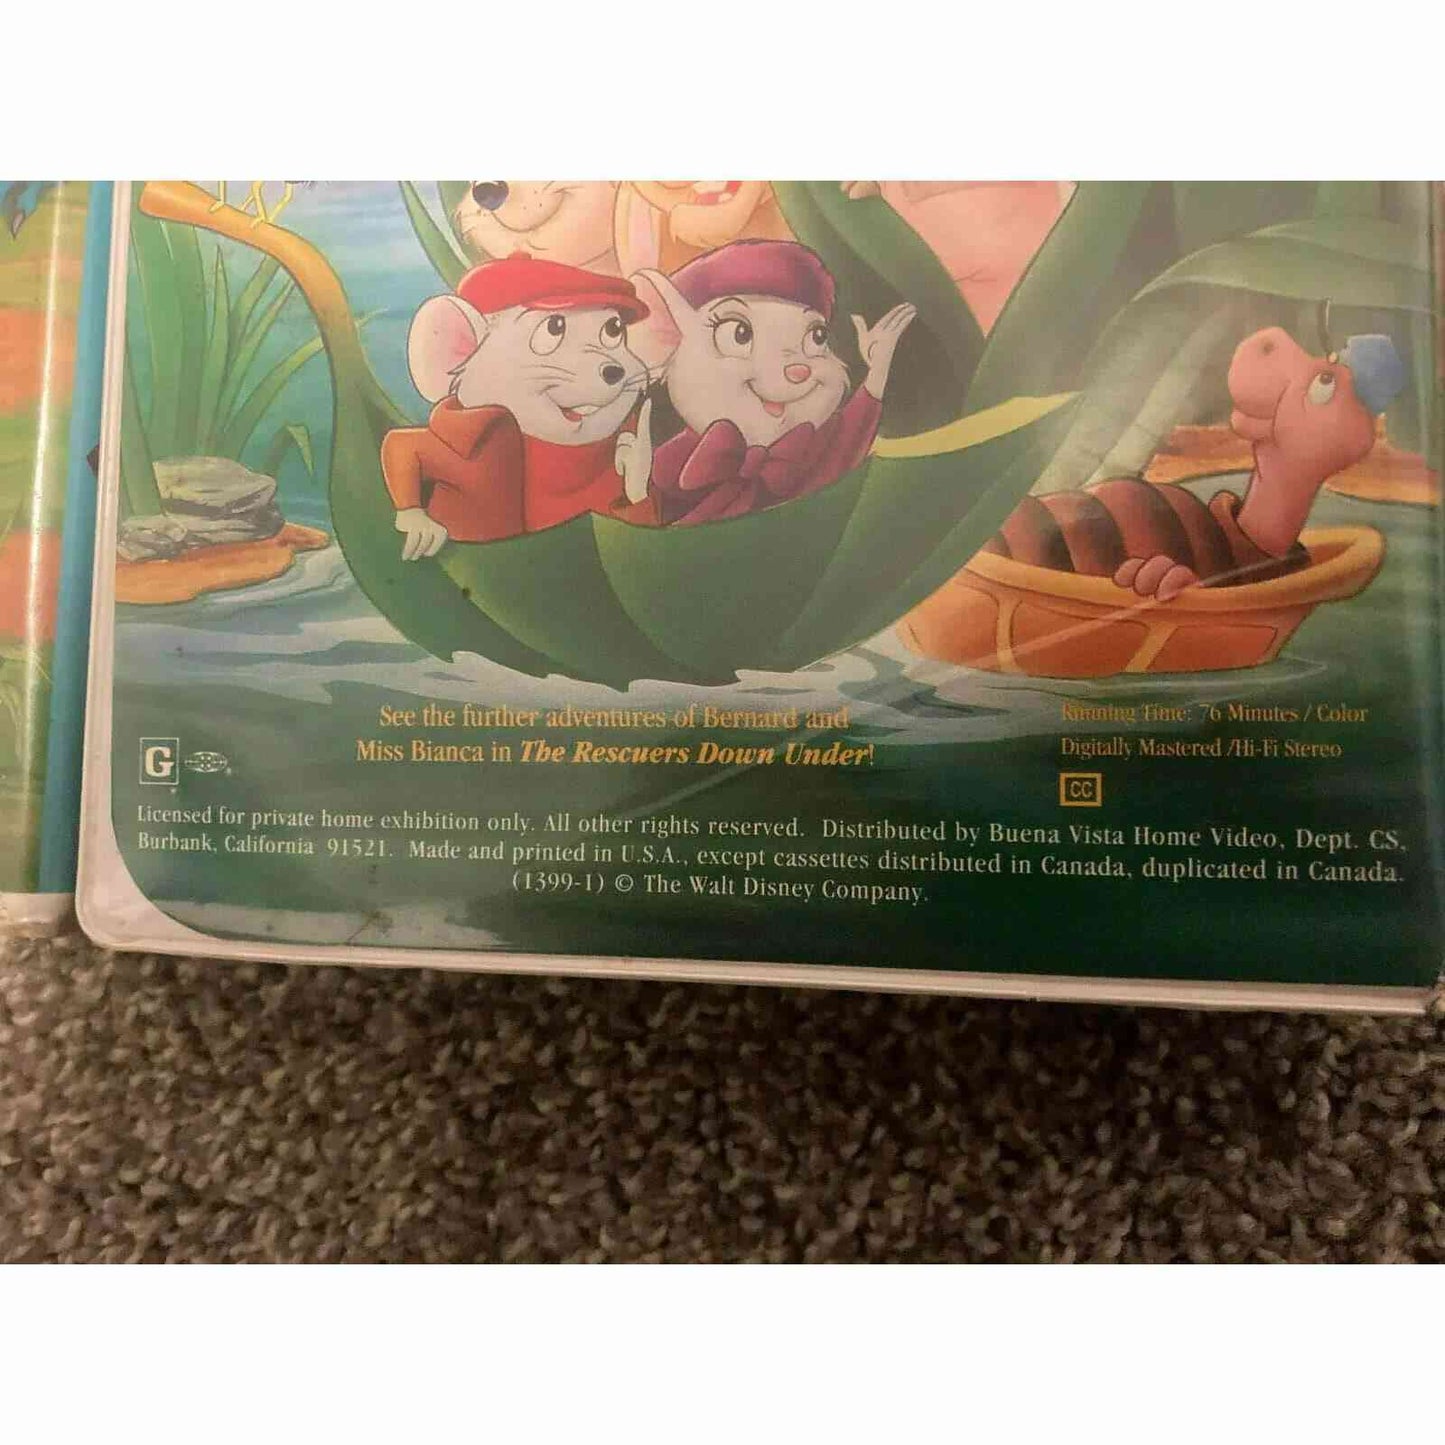 The Rescuers + Down Under (VHS, 1991, 1992) BooksCardsNBikes